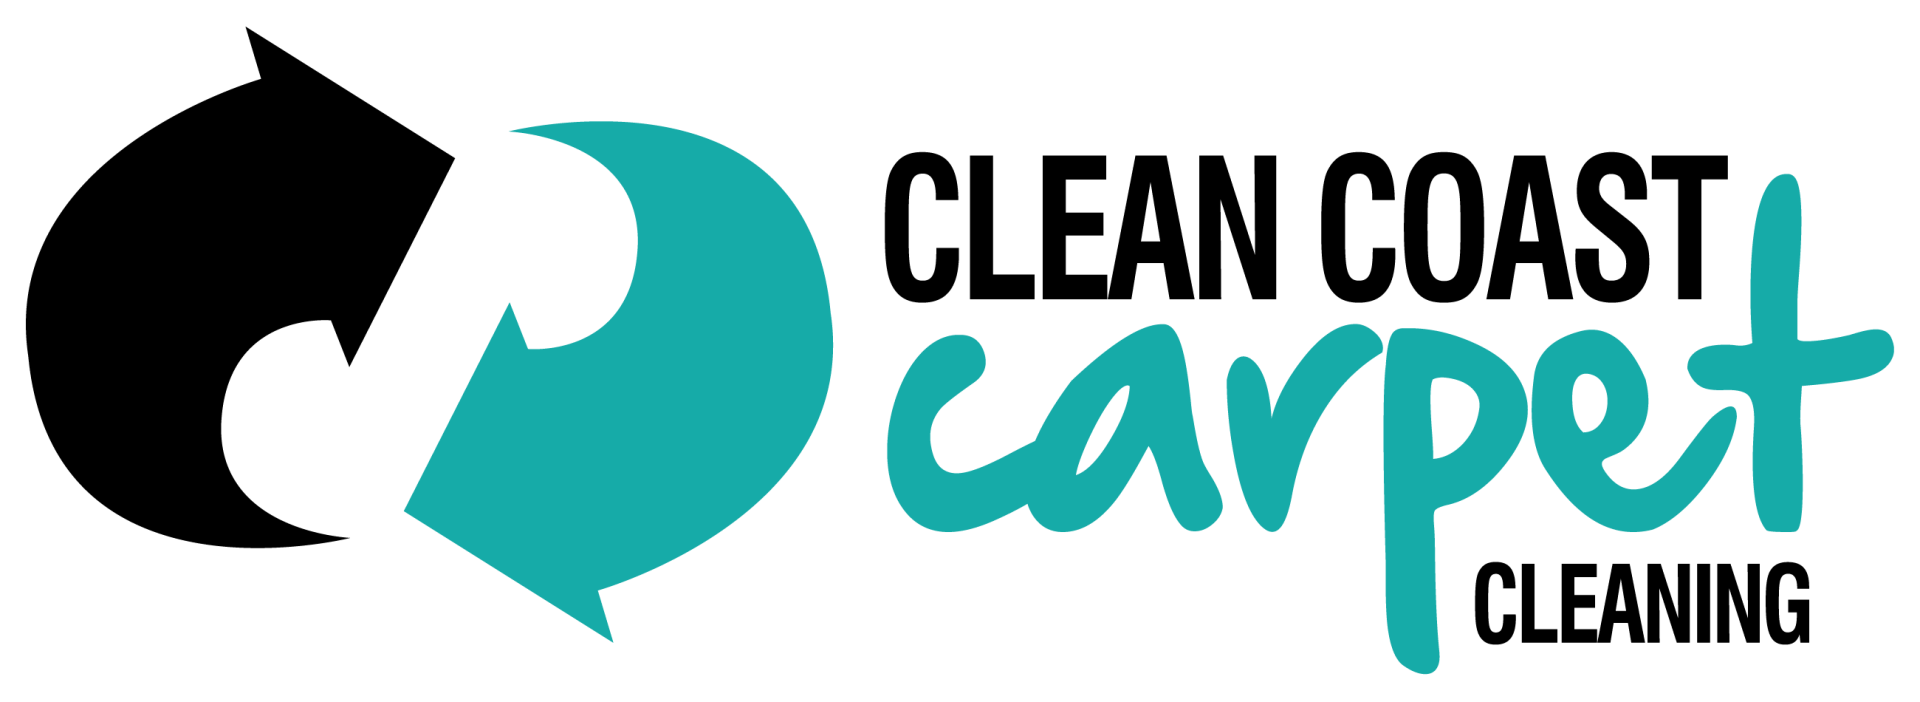 Clean Coast Carpet Cleaning: Domestic & Commercial Cleaner In Port Stephens